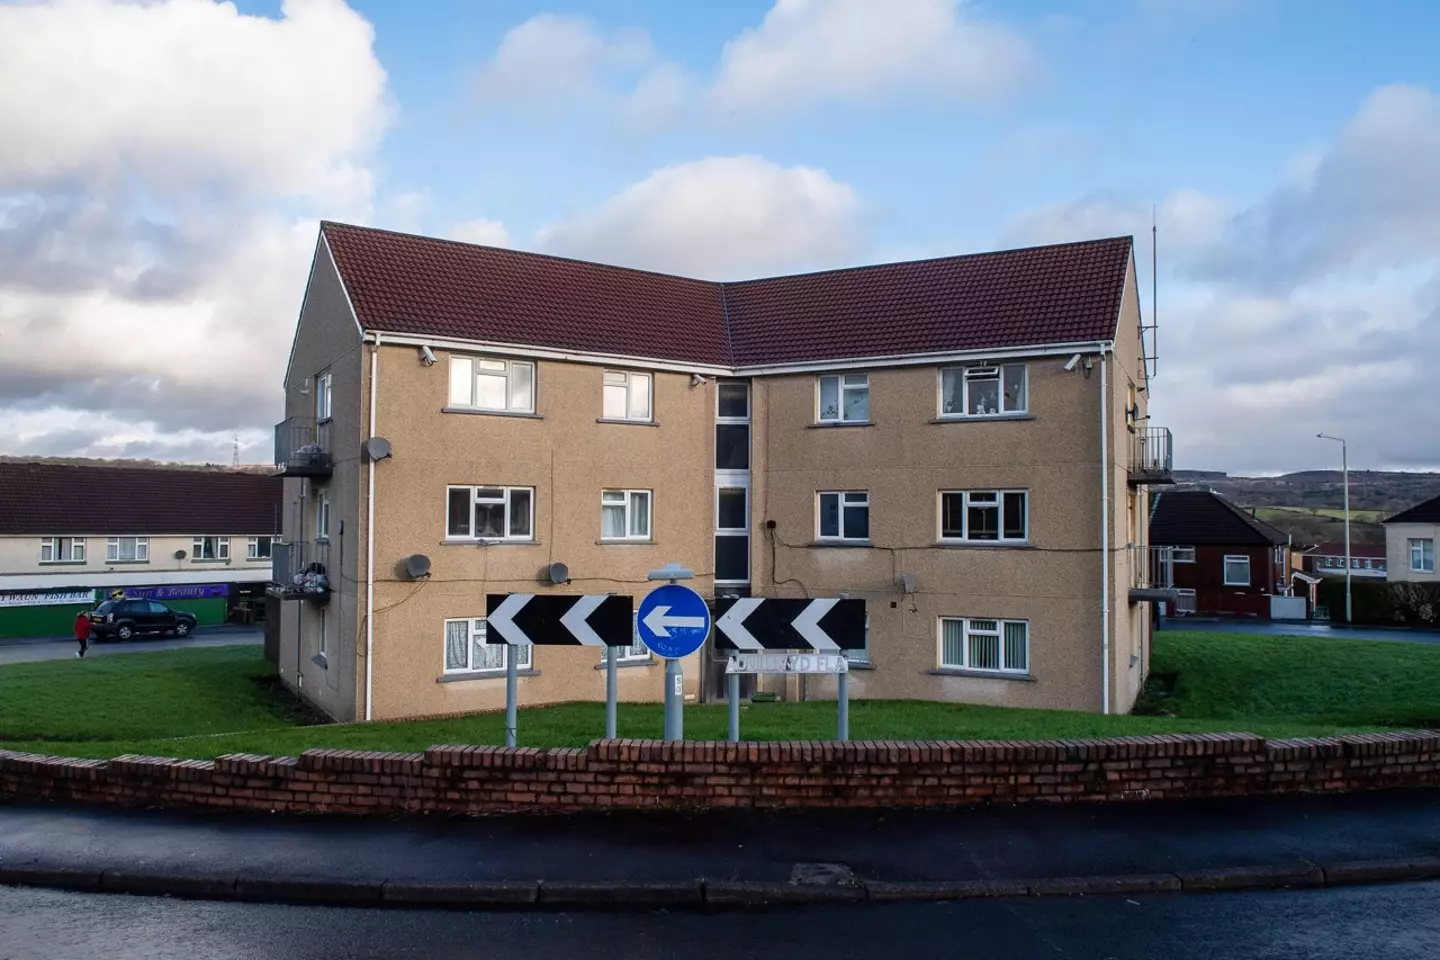 n the middle of the roundabout - which joins Lawrence Avenue to the west with Arfryn to the north and south - are the unmissable Waunllwyd flats.